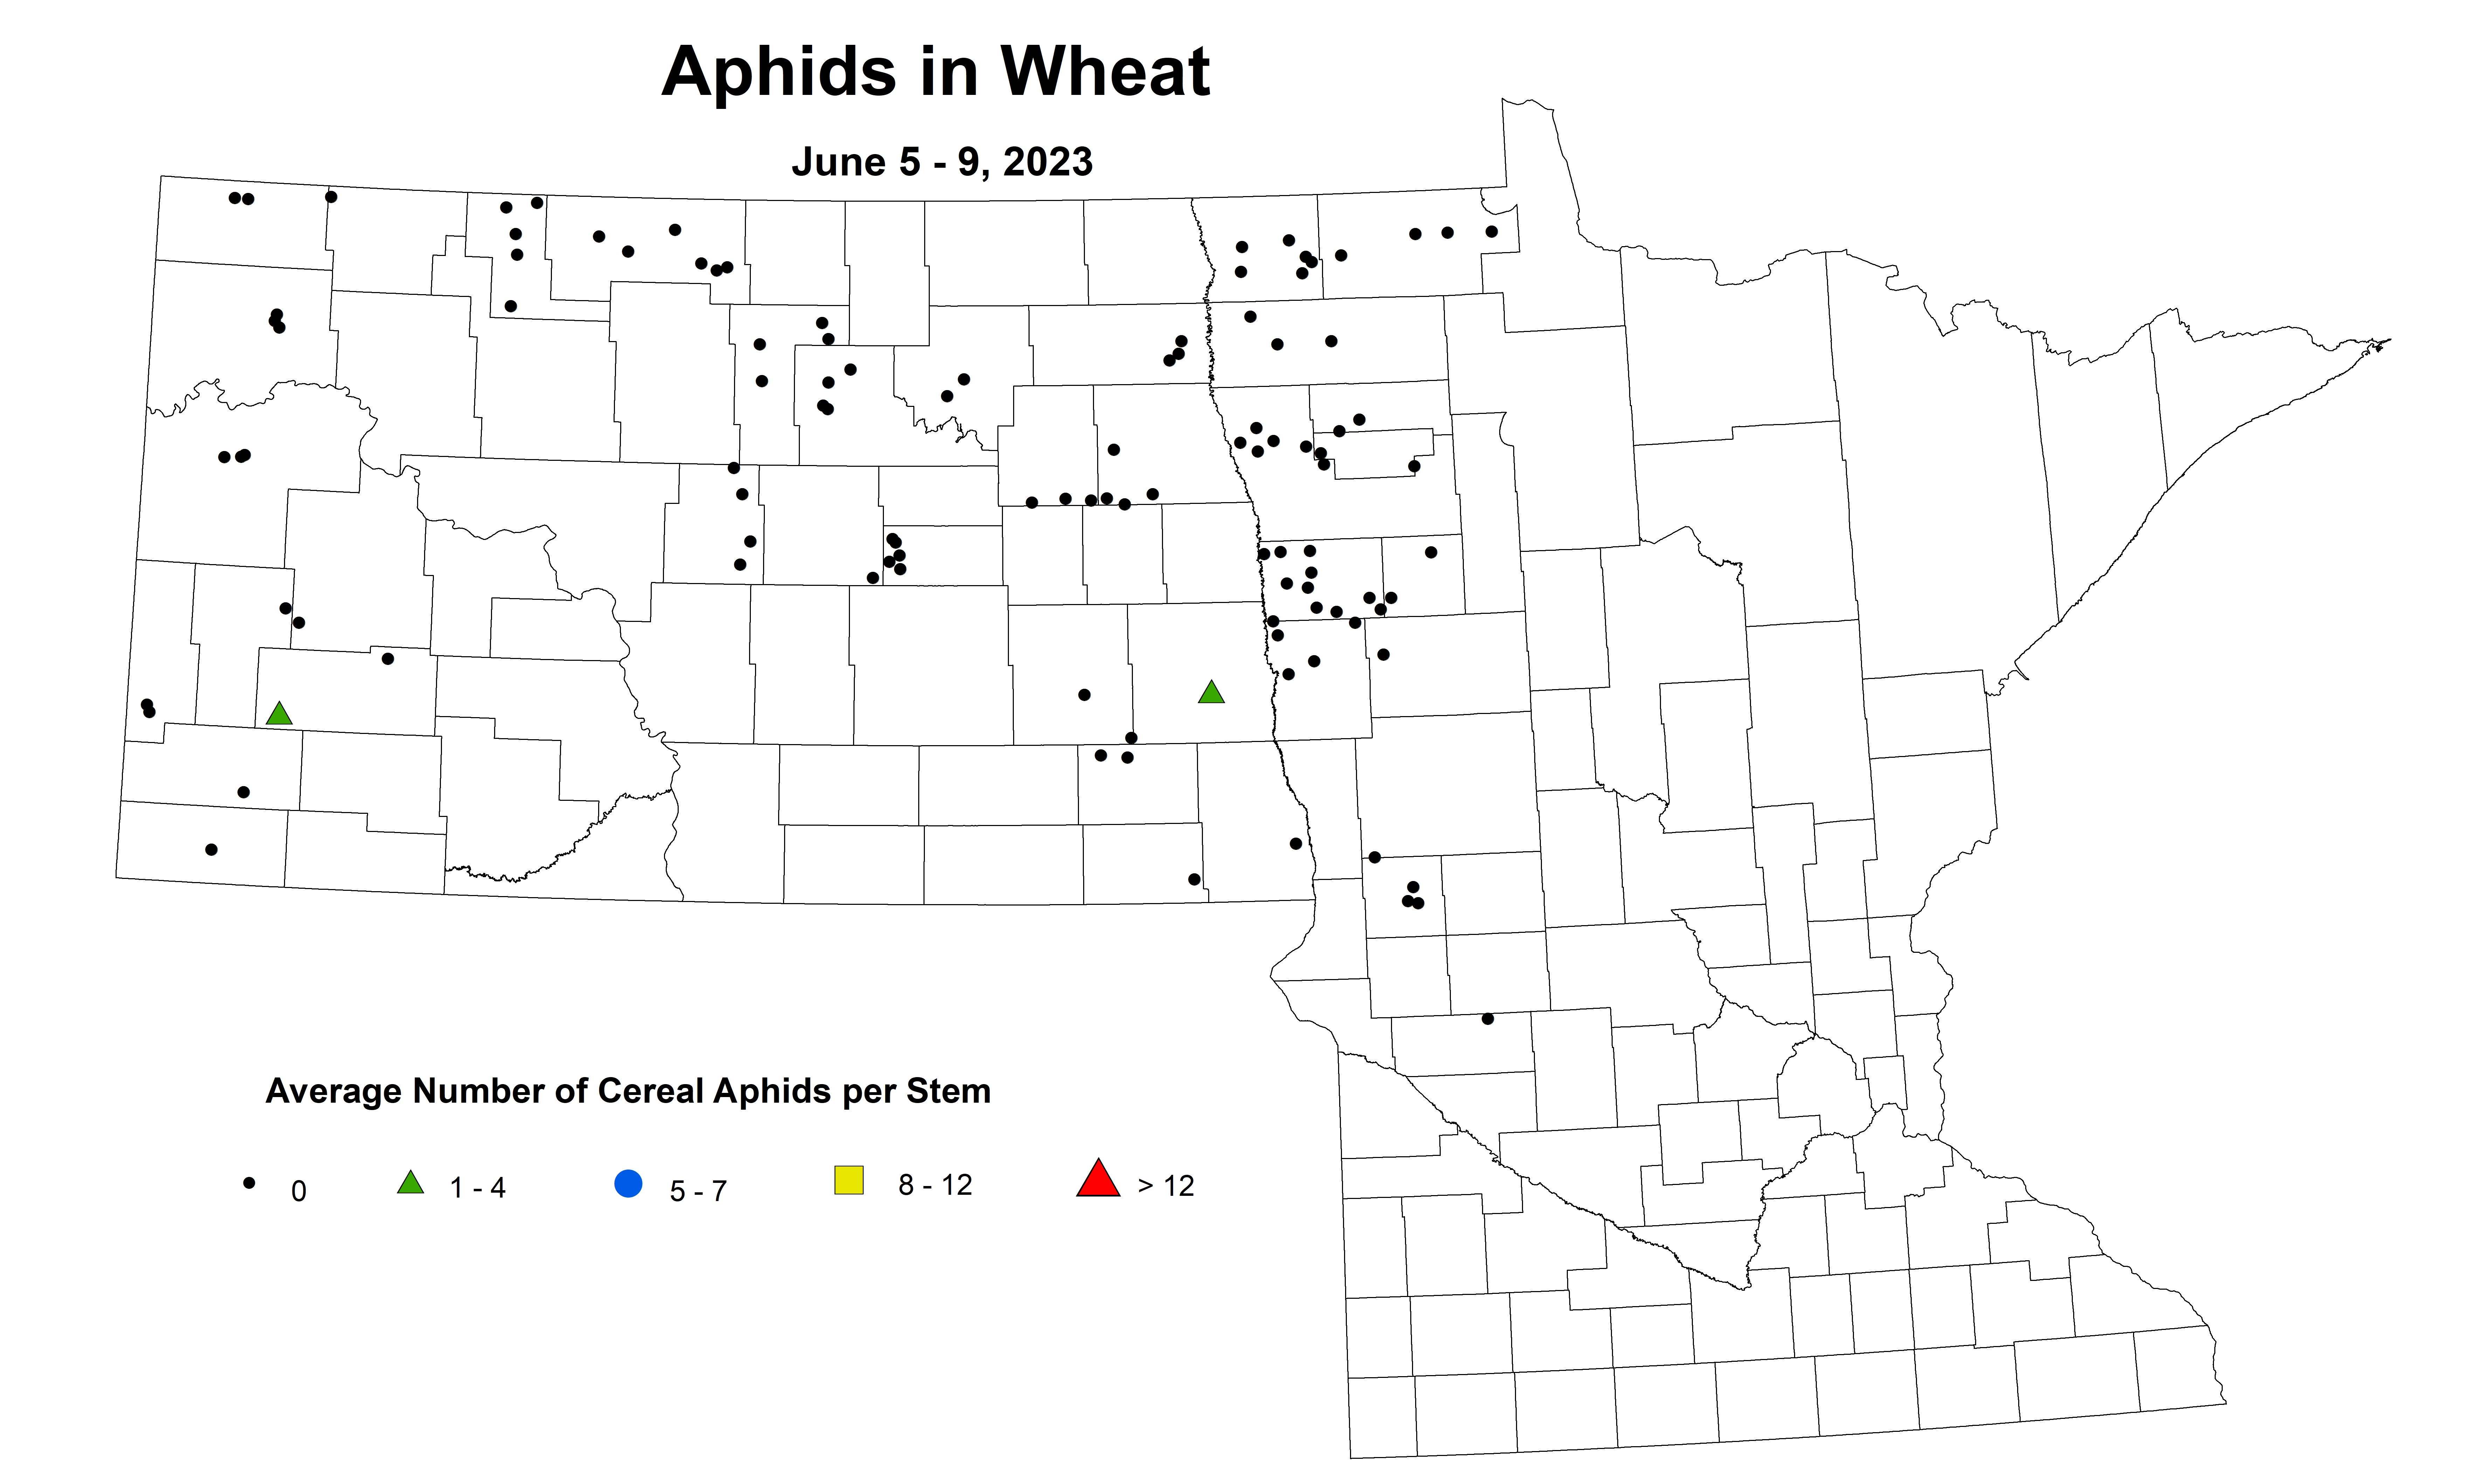 wheat aphids June 5-9 2023